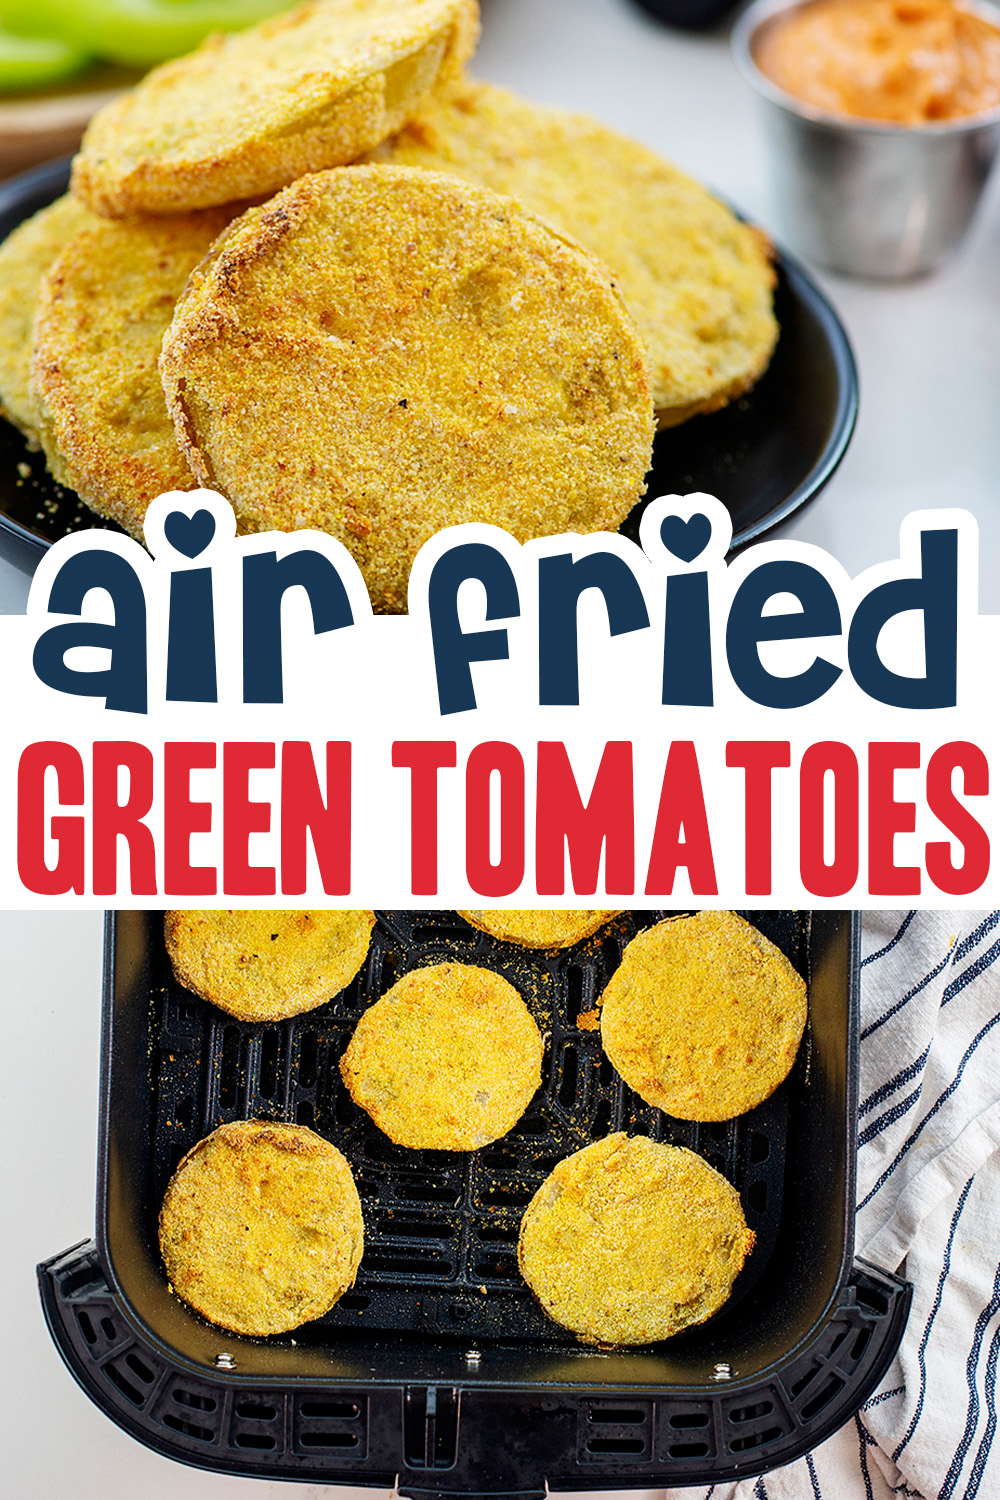 Fried green tomatoes are an underappreciated mid day snack.  This air frryer recipe is a great way to cook them without making a big mess to clean up!